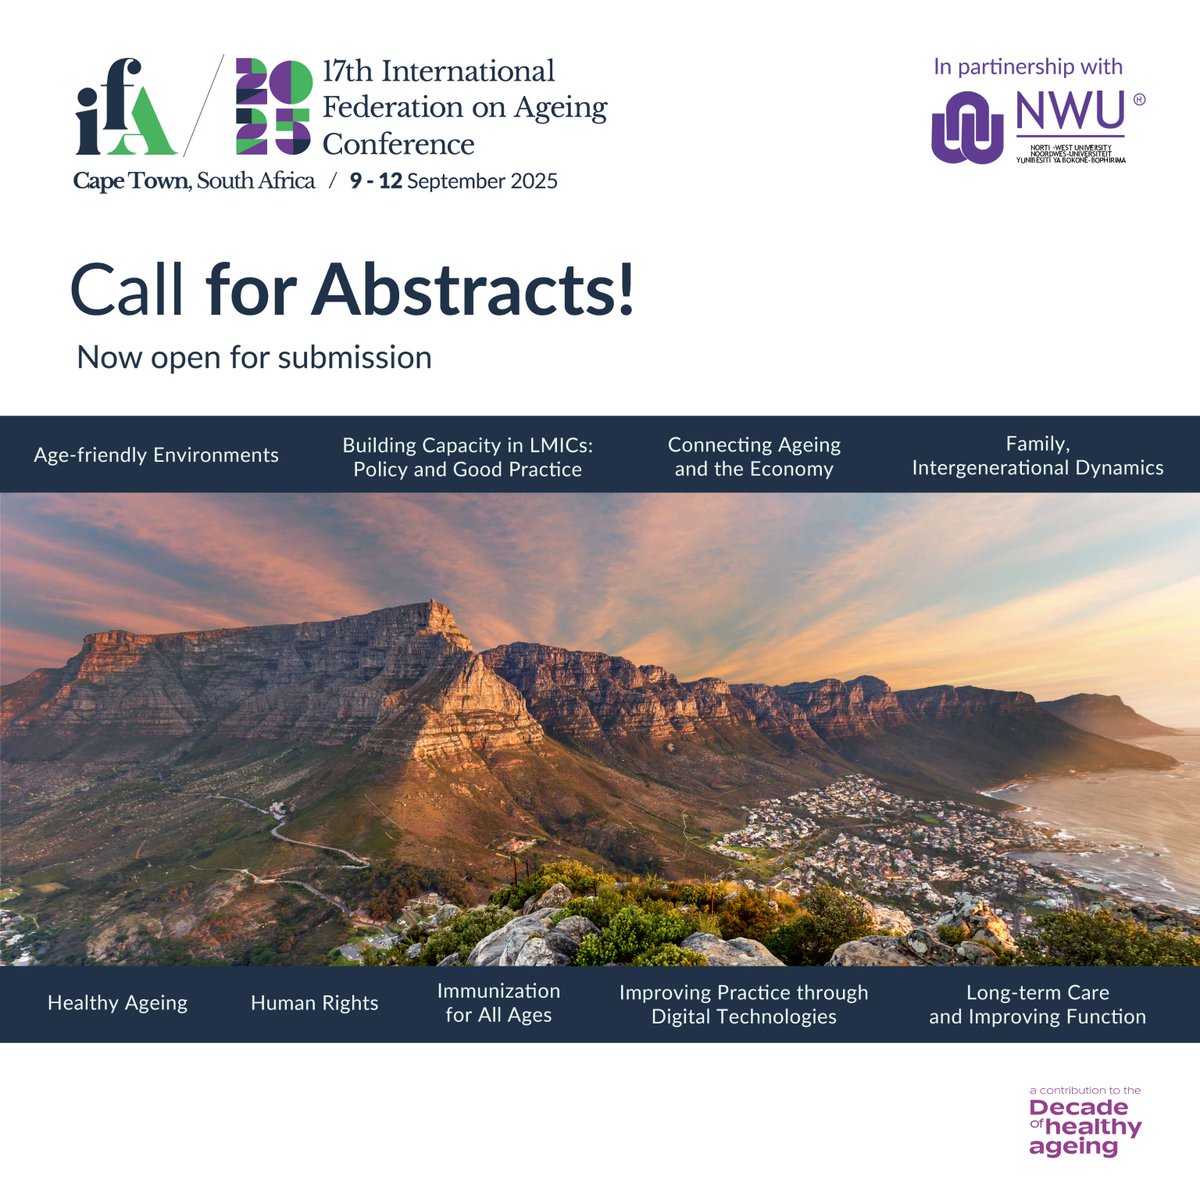 Dive into the diverse topics shaping the future of ageing at the #IFACONF2025! 
Don't miss your chance to be part of something greater - submit your abstracts today and secure your spot! 
Visit ifaconf.ngo to know more

#AgeingConference #CallforAbstracts